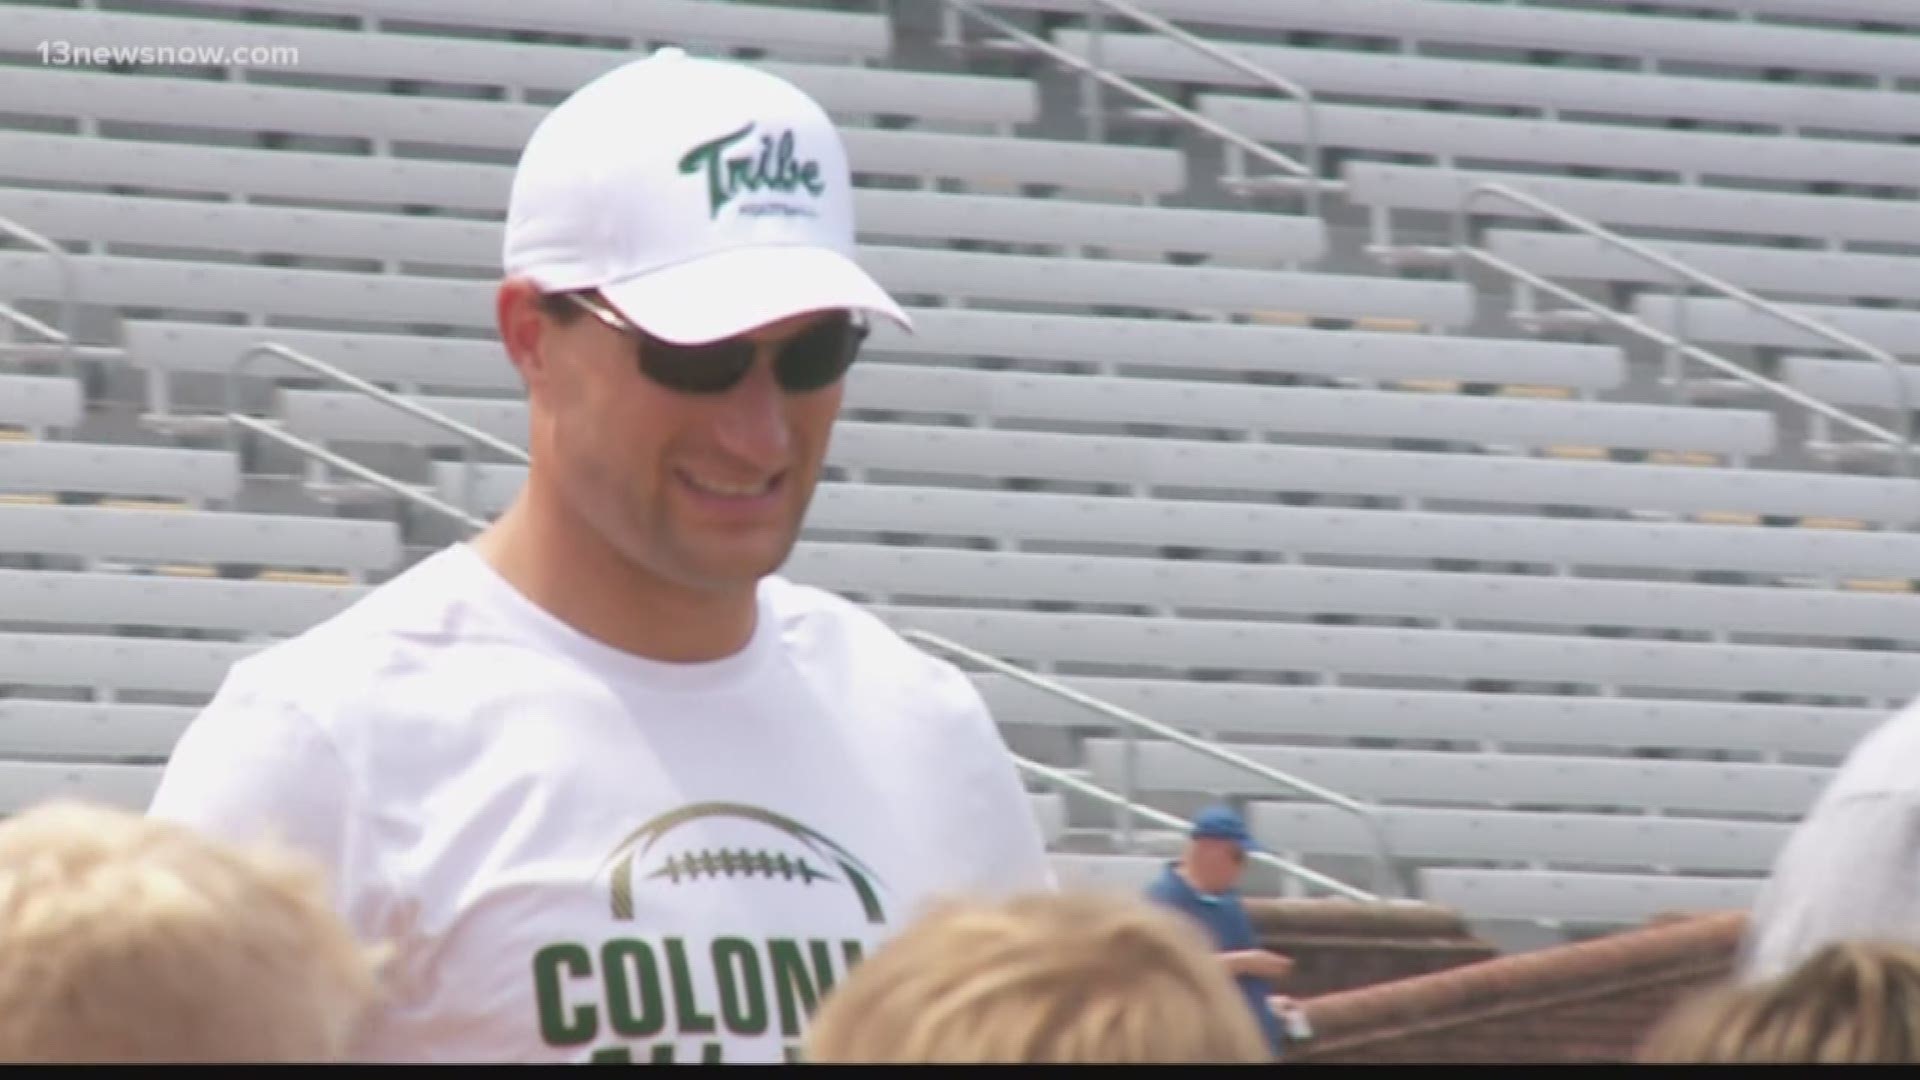 Kirk Cousins made his guest appearance at the Colonial All-Pro Camp at the College of William and Mary. He's ready for the next adventure.